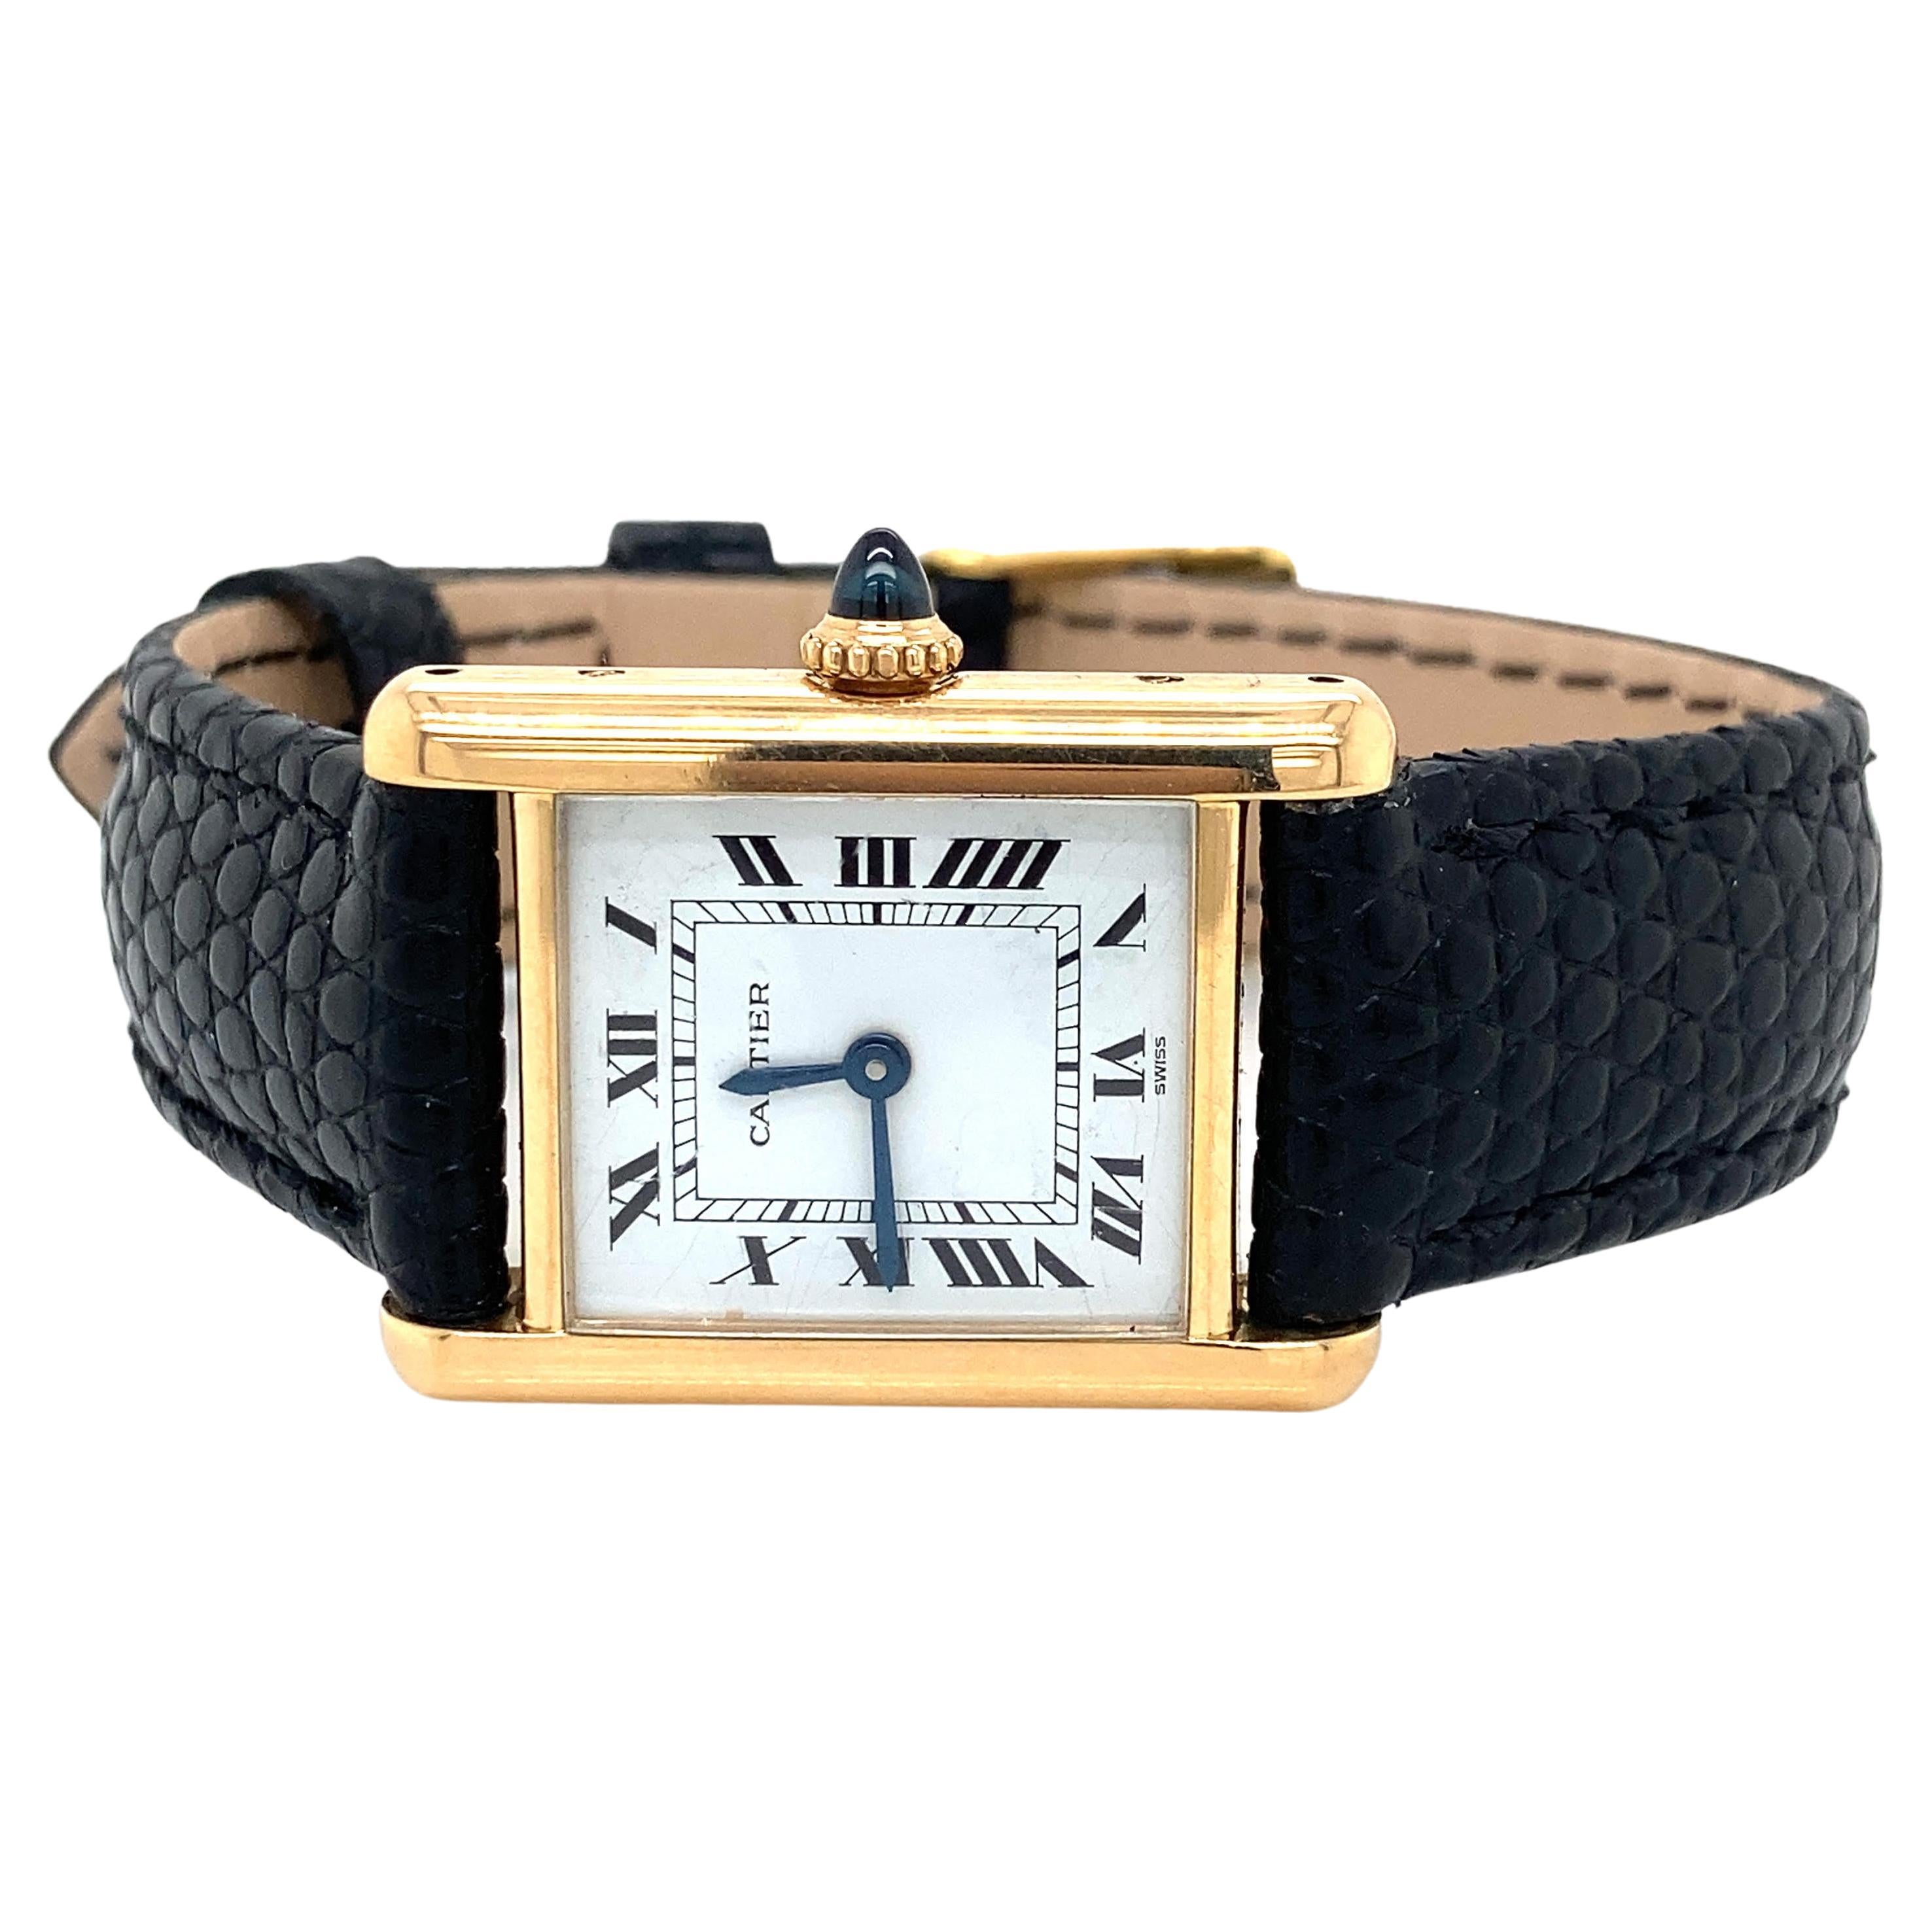 18K yellow gold
Cartier Tank
Vintage 
New genuine leather band added (Not Cartier)
